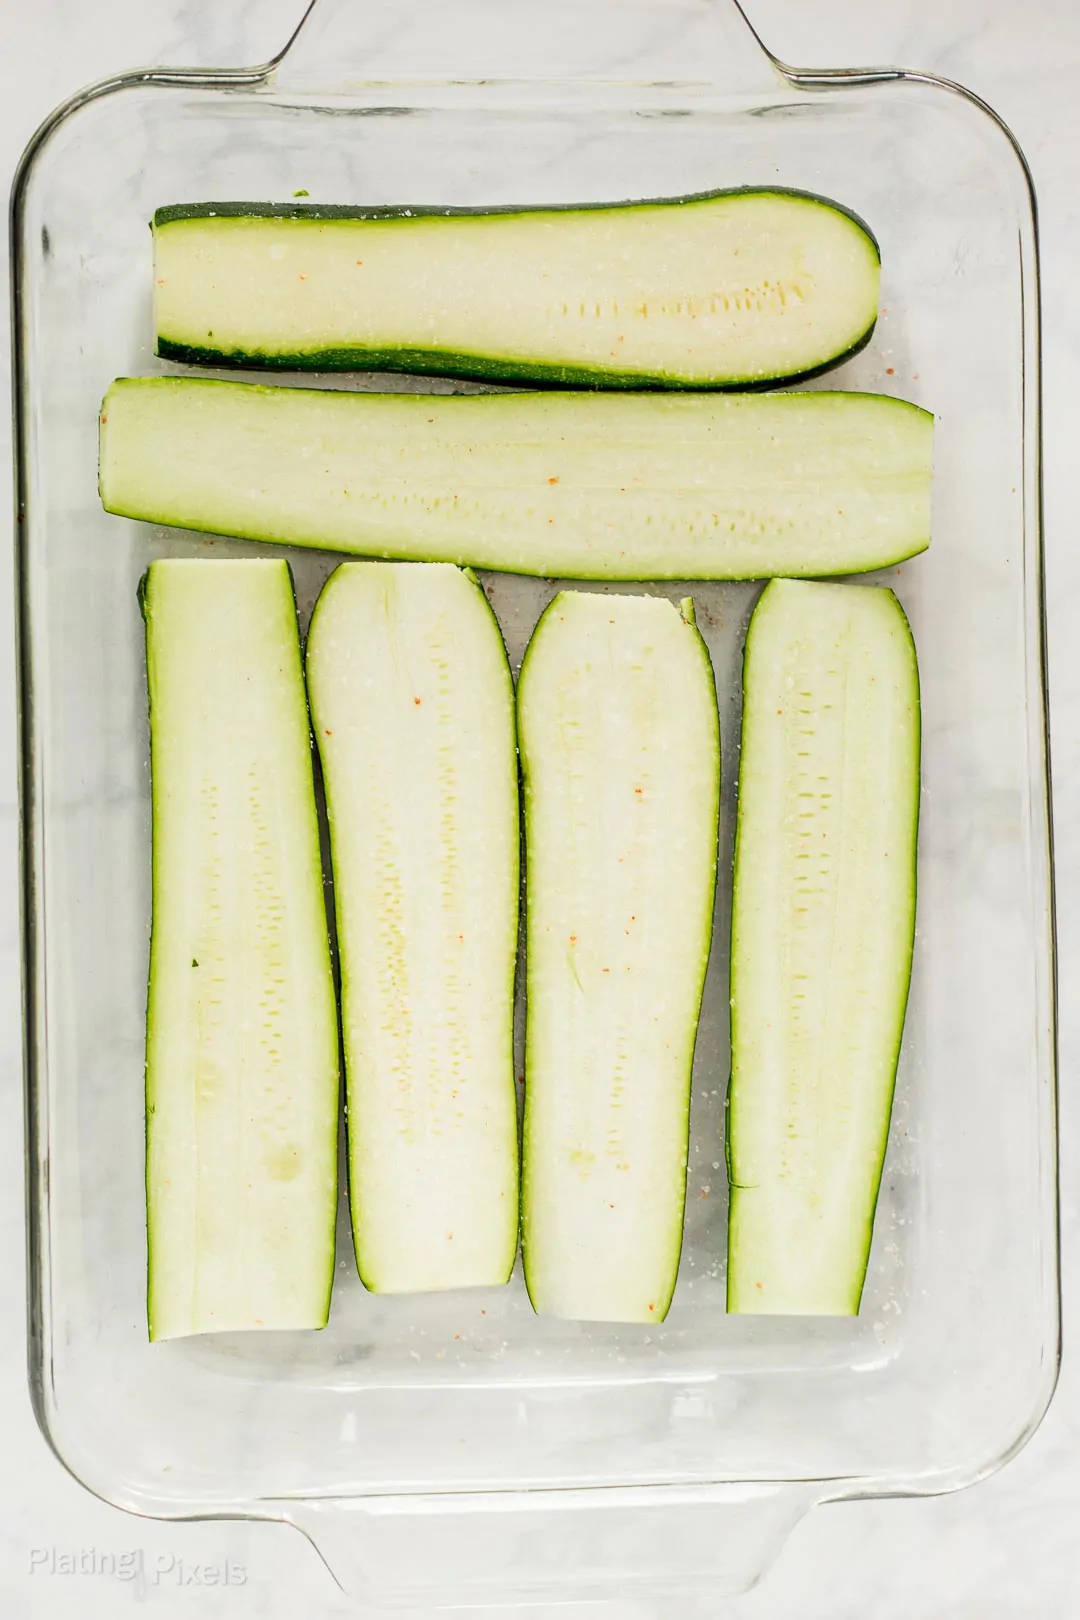 Layer of zucchini slices in a glass baking dish